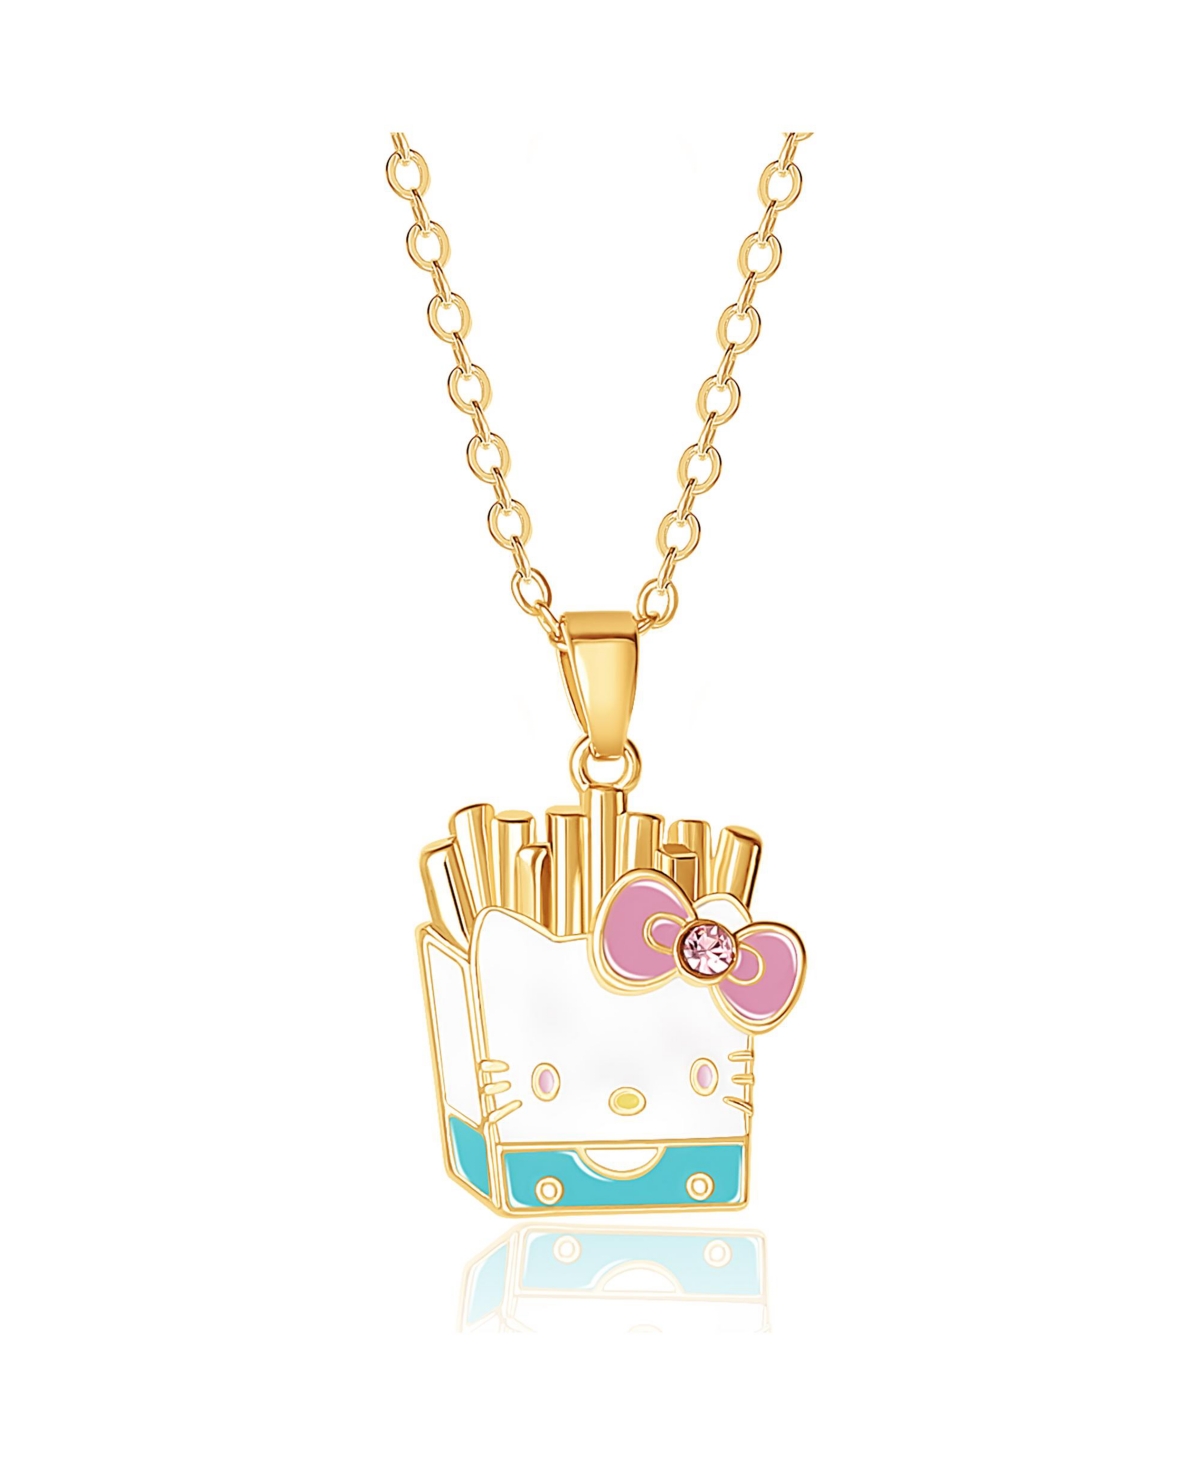 Sanrio Hello Kitty Brass Enamel and Pink Crystal Cafe French Fries 3D Pendant, 16+ 2'' Chain - Green, gold tone, white